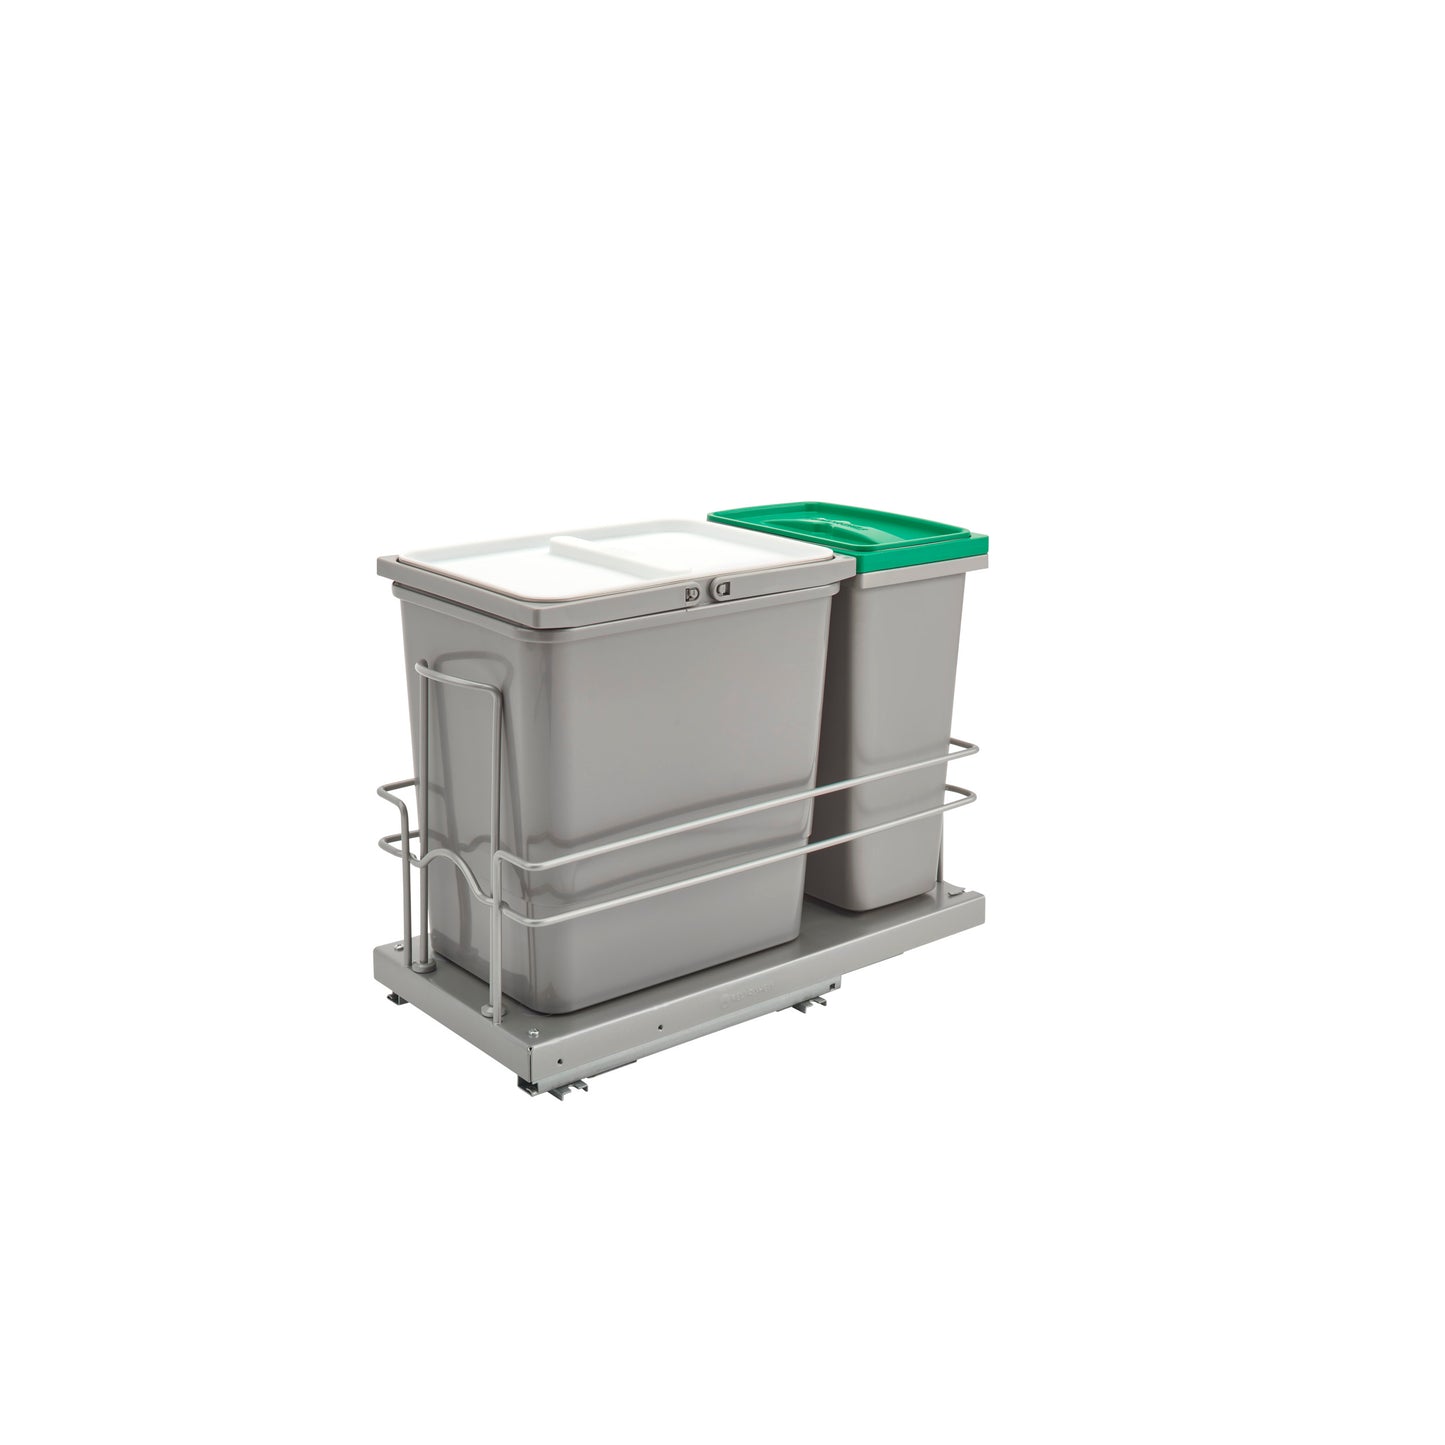 Rev-A-Shelf / 5SBWC-815S-1 / Undersink Pullout Waste/Trash Container w/ Soft-Close